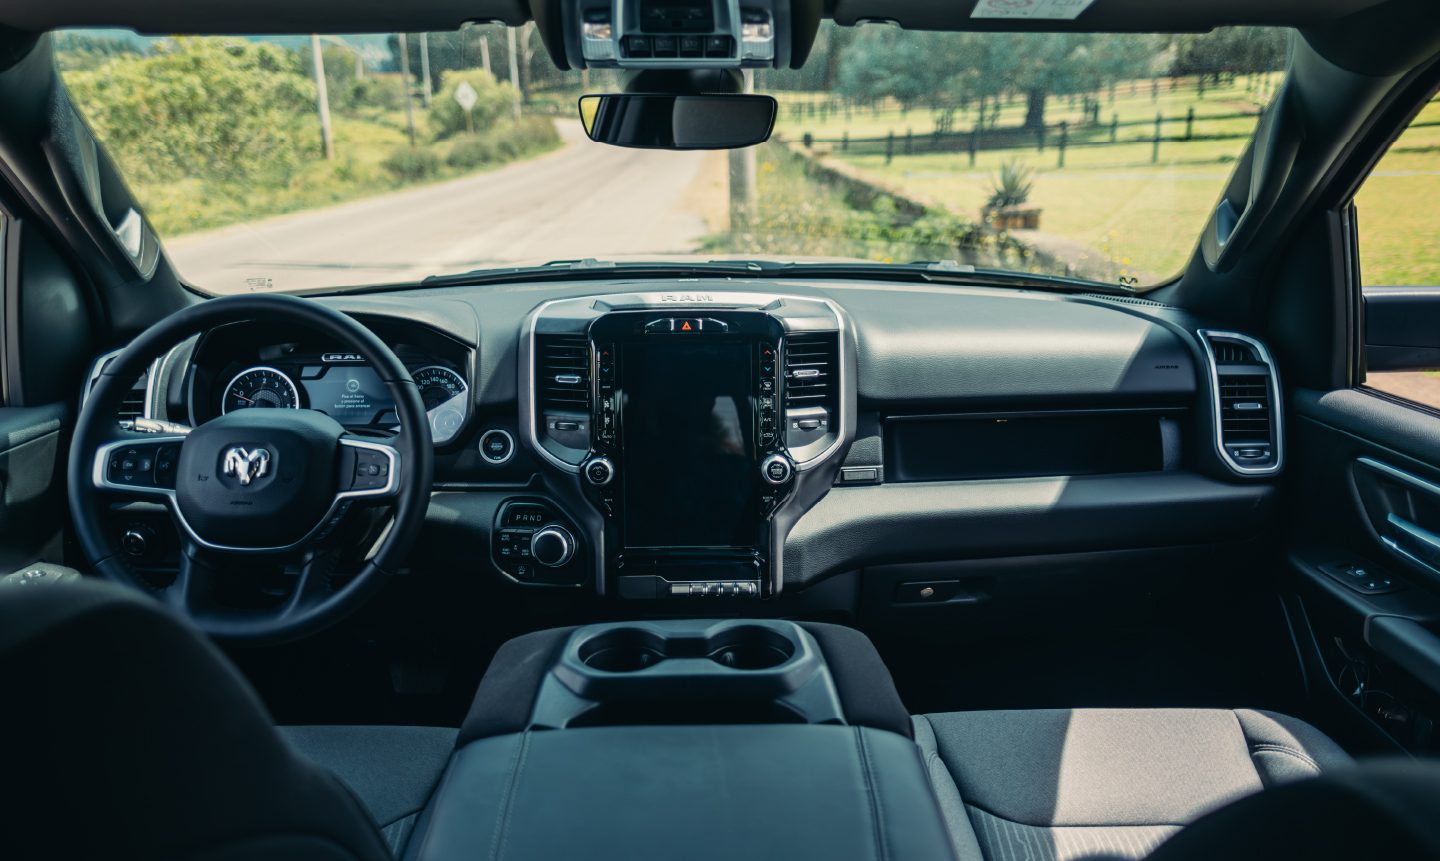 The interior of the 2023 Ram 1500